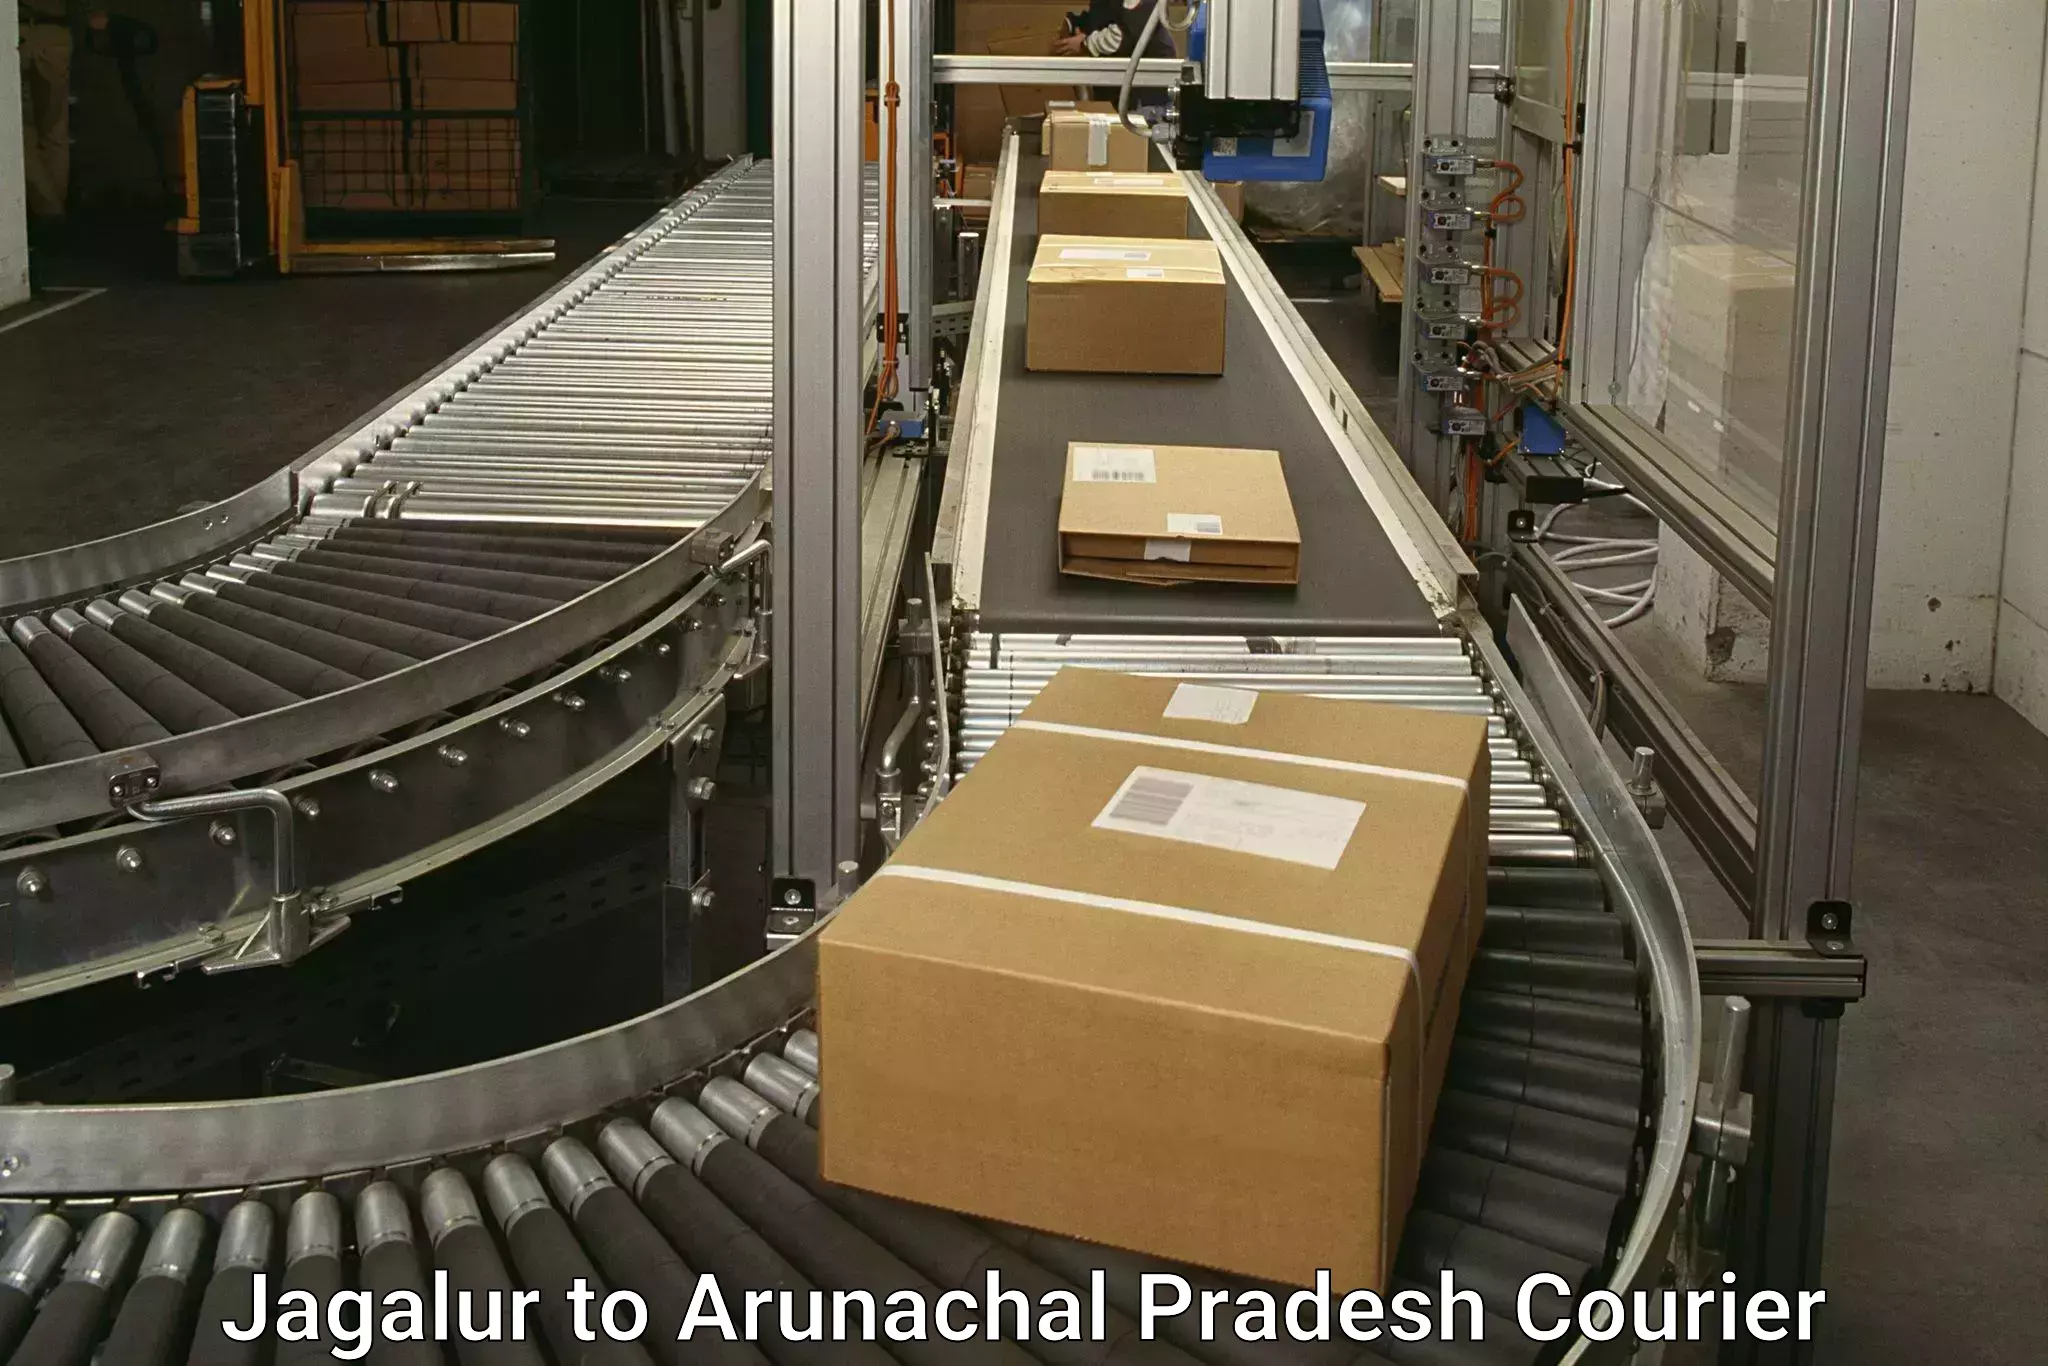 State-of-the-art courier technology Jagalur to Lower Dibang Valley